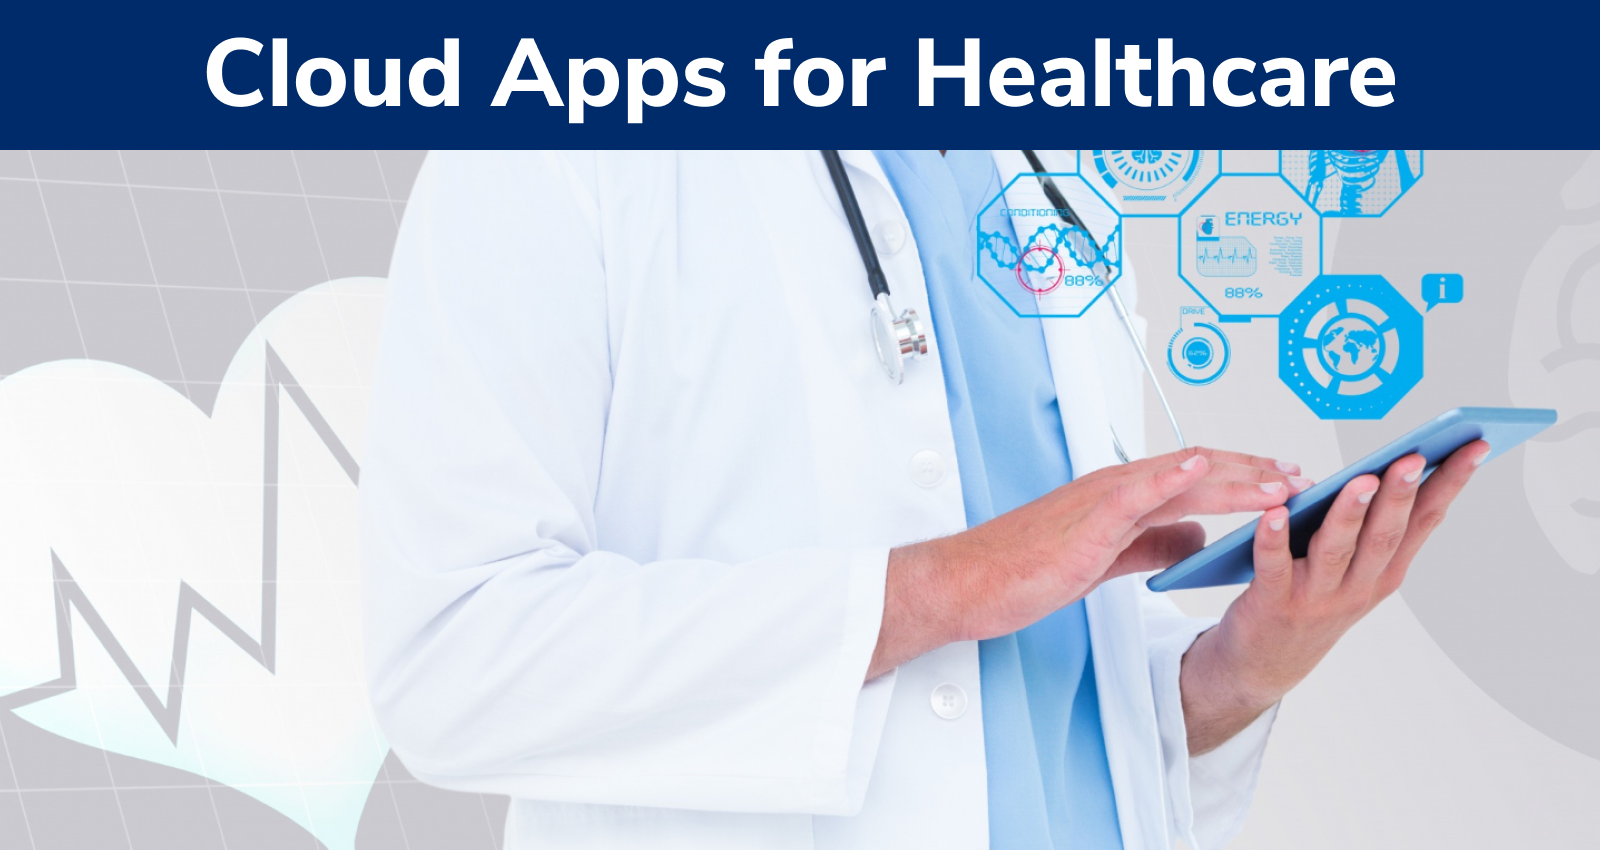 Optimizing cloud applications for healthcare, Healthcare services with cloud applications, Healthcare industry, Cloud computing applications